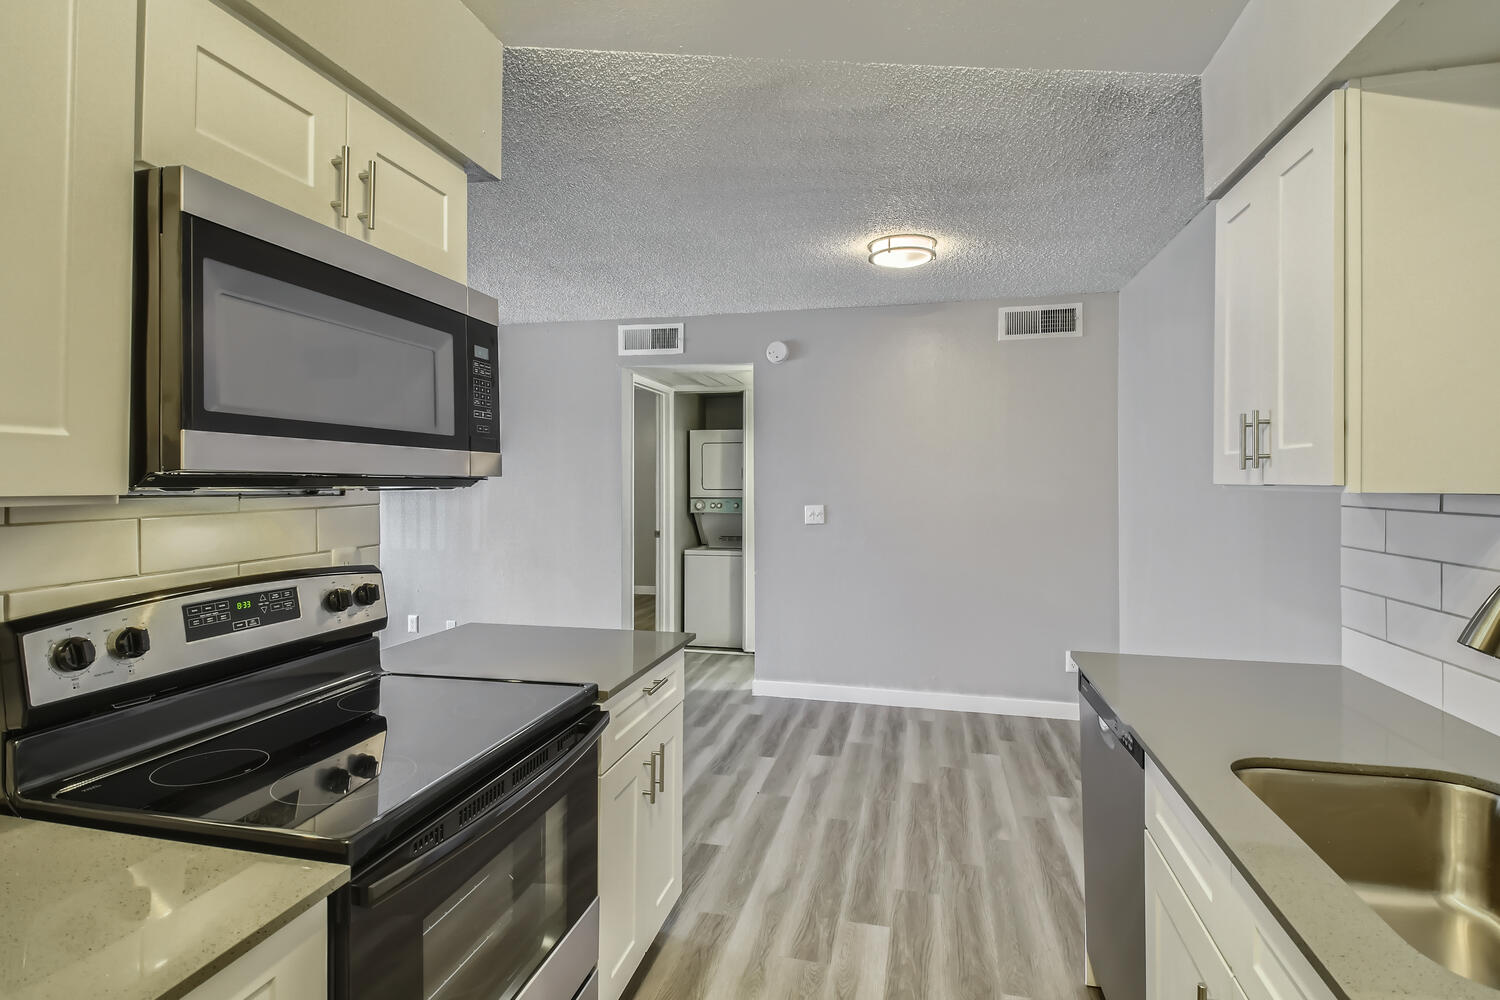 A kitchen at Rise North Ridge apartments near the dining area.